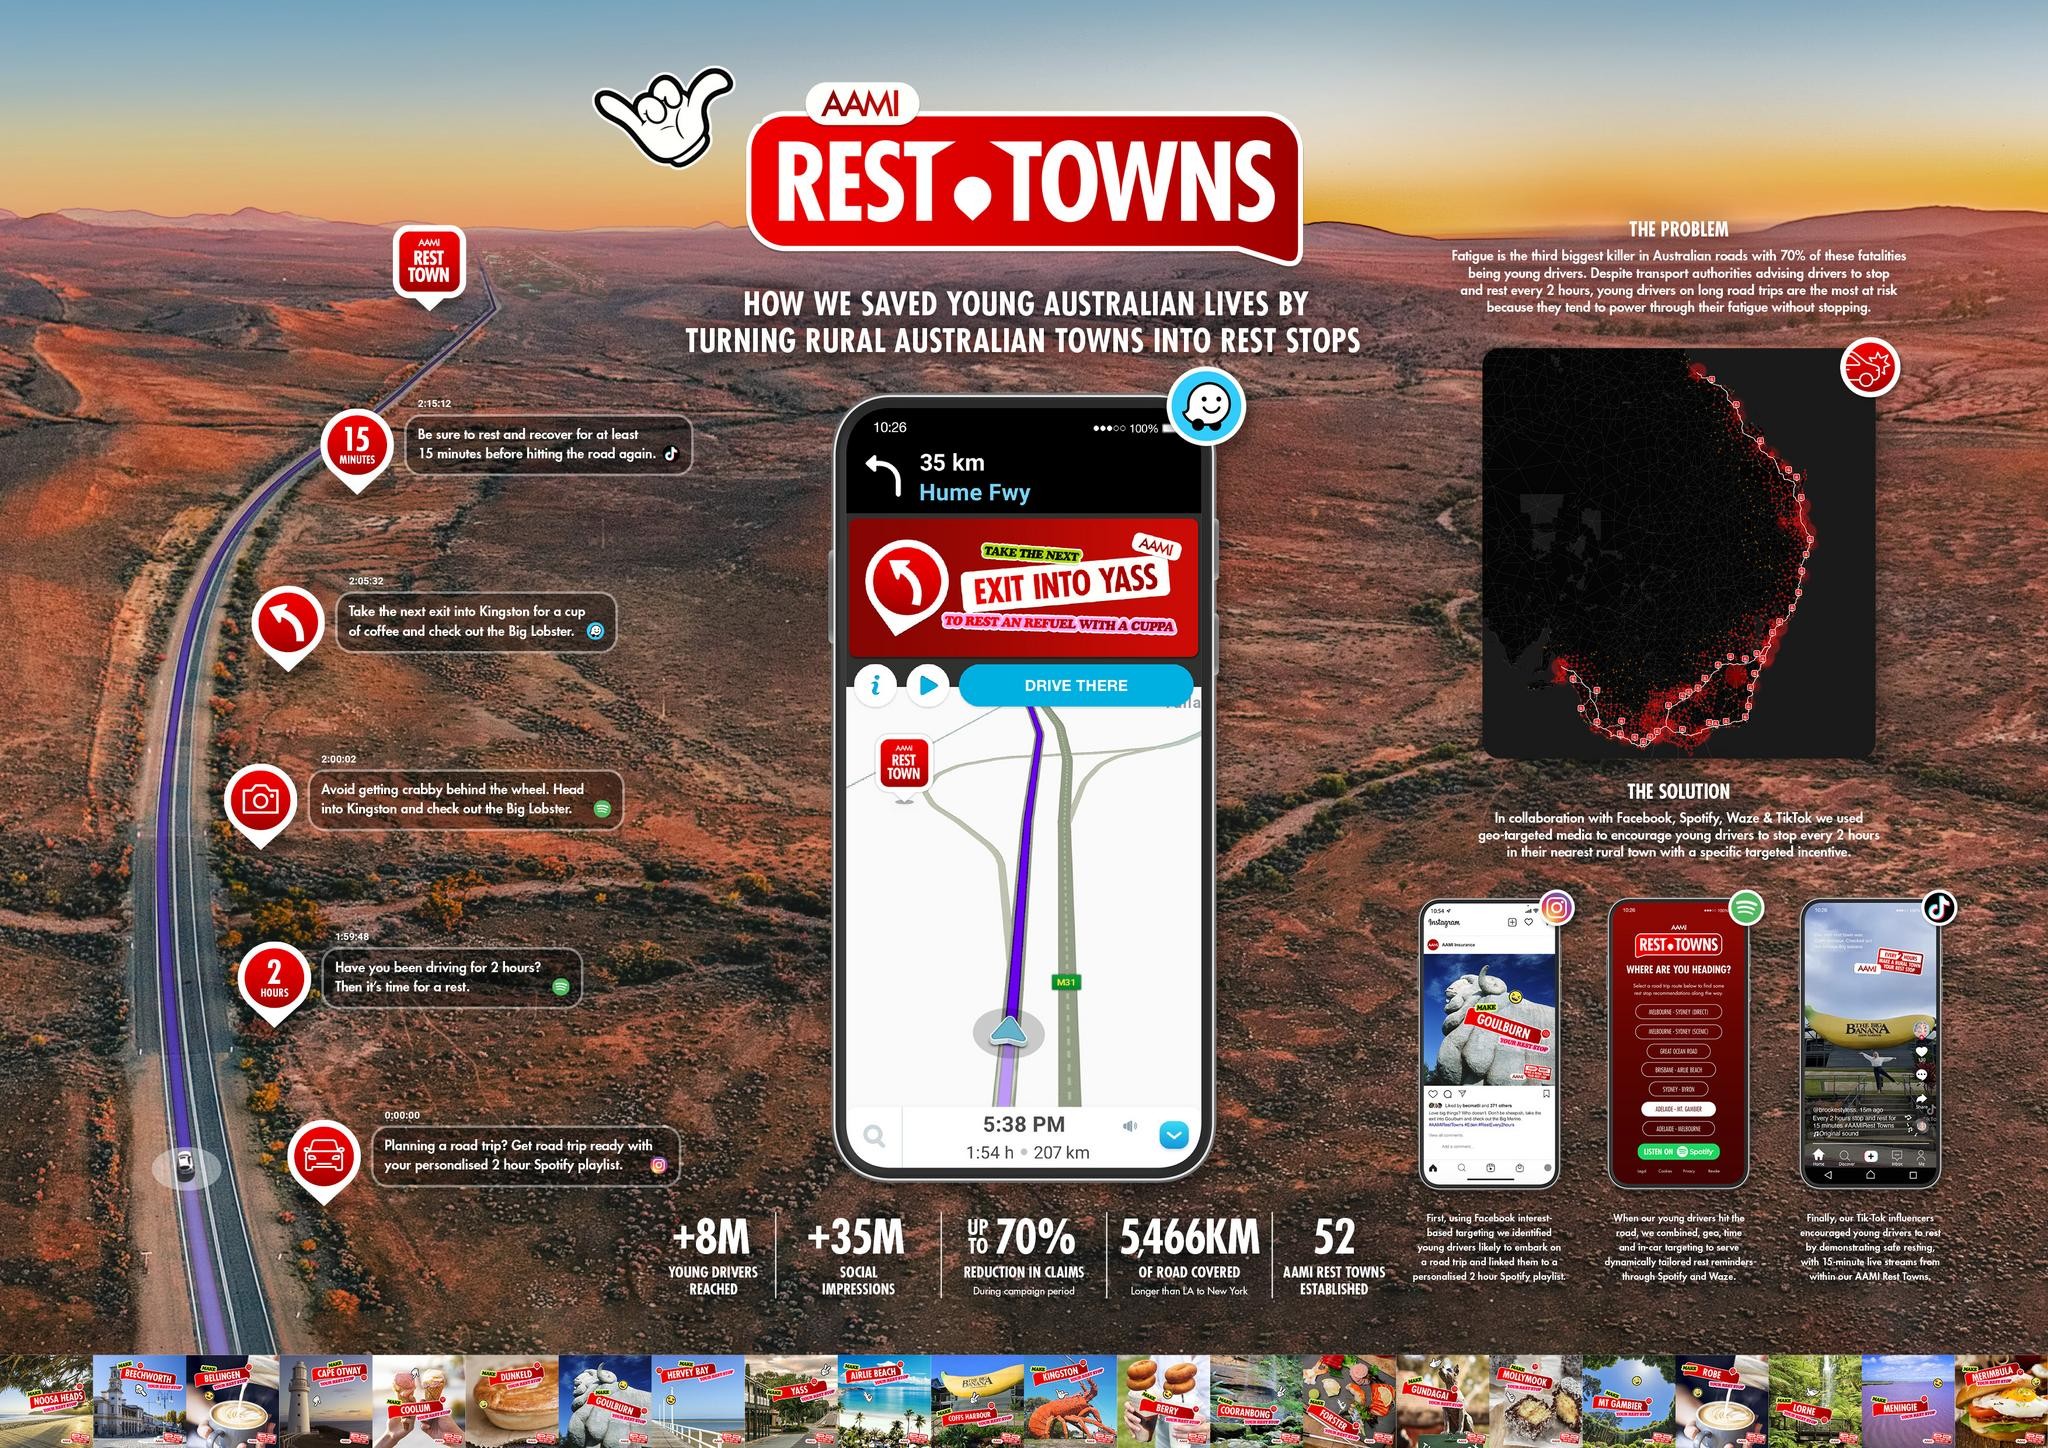 AAMI REST TOWNS